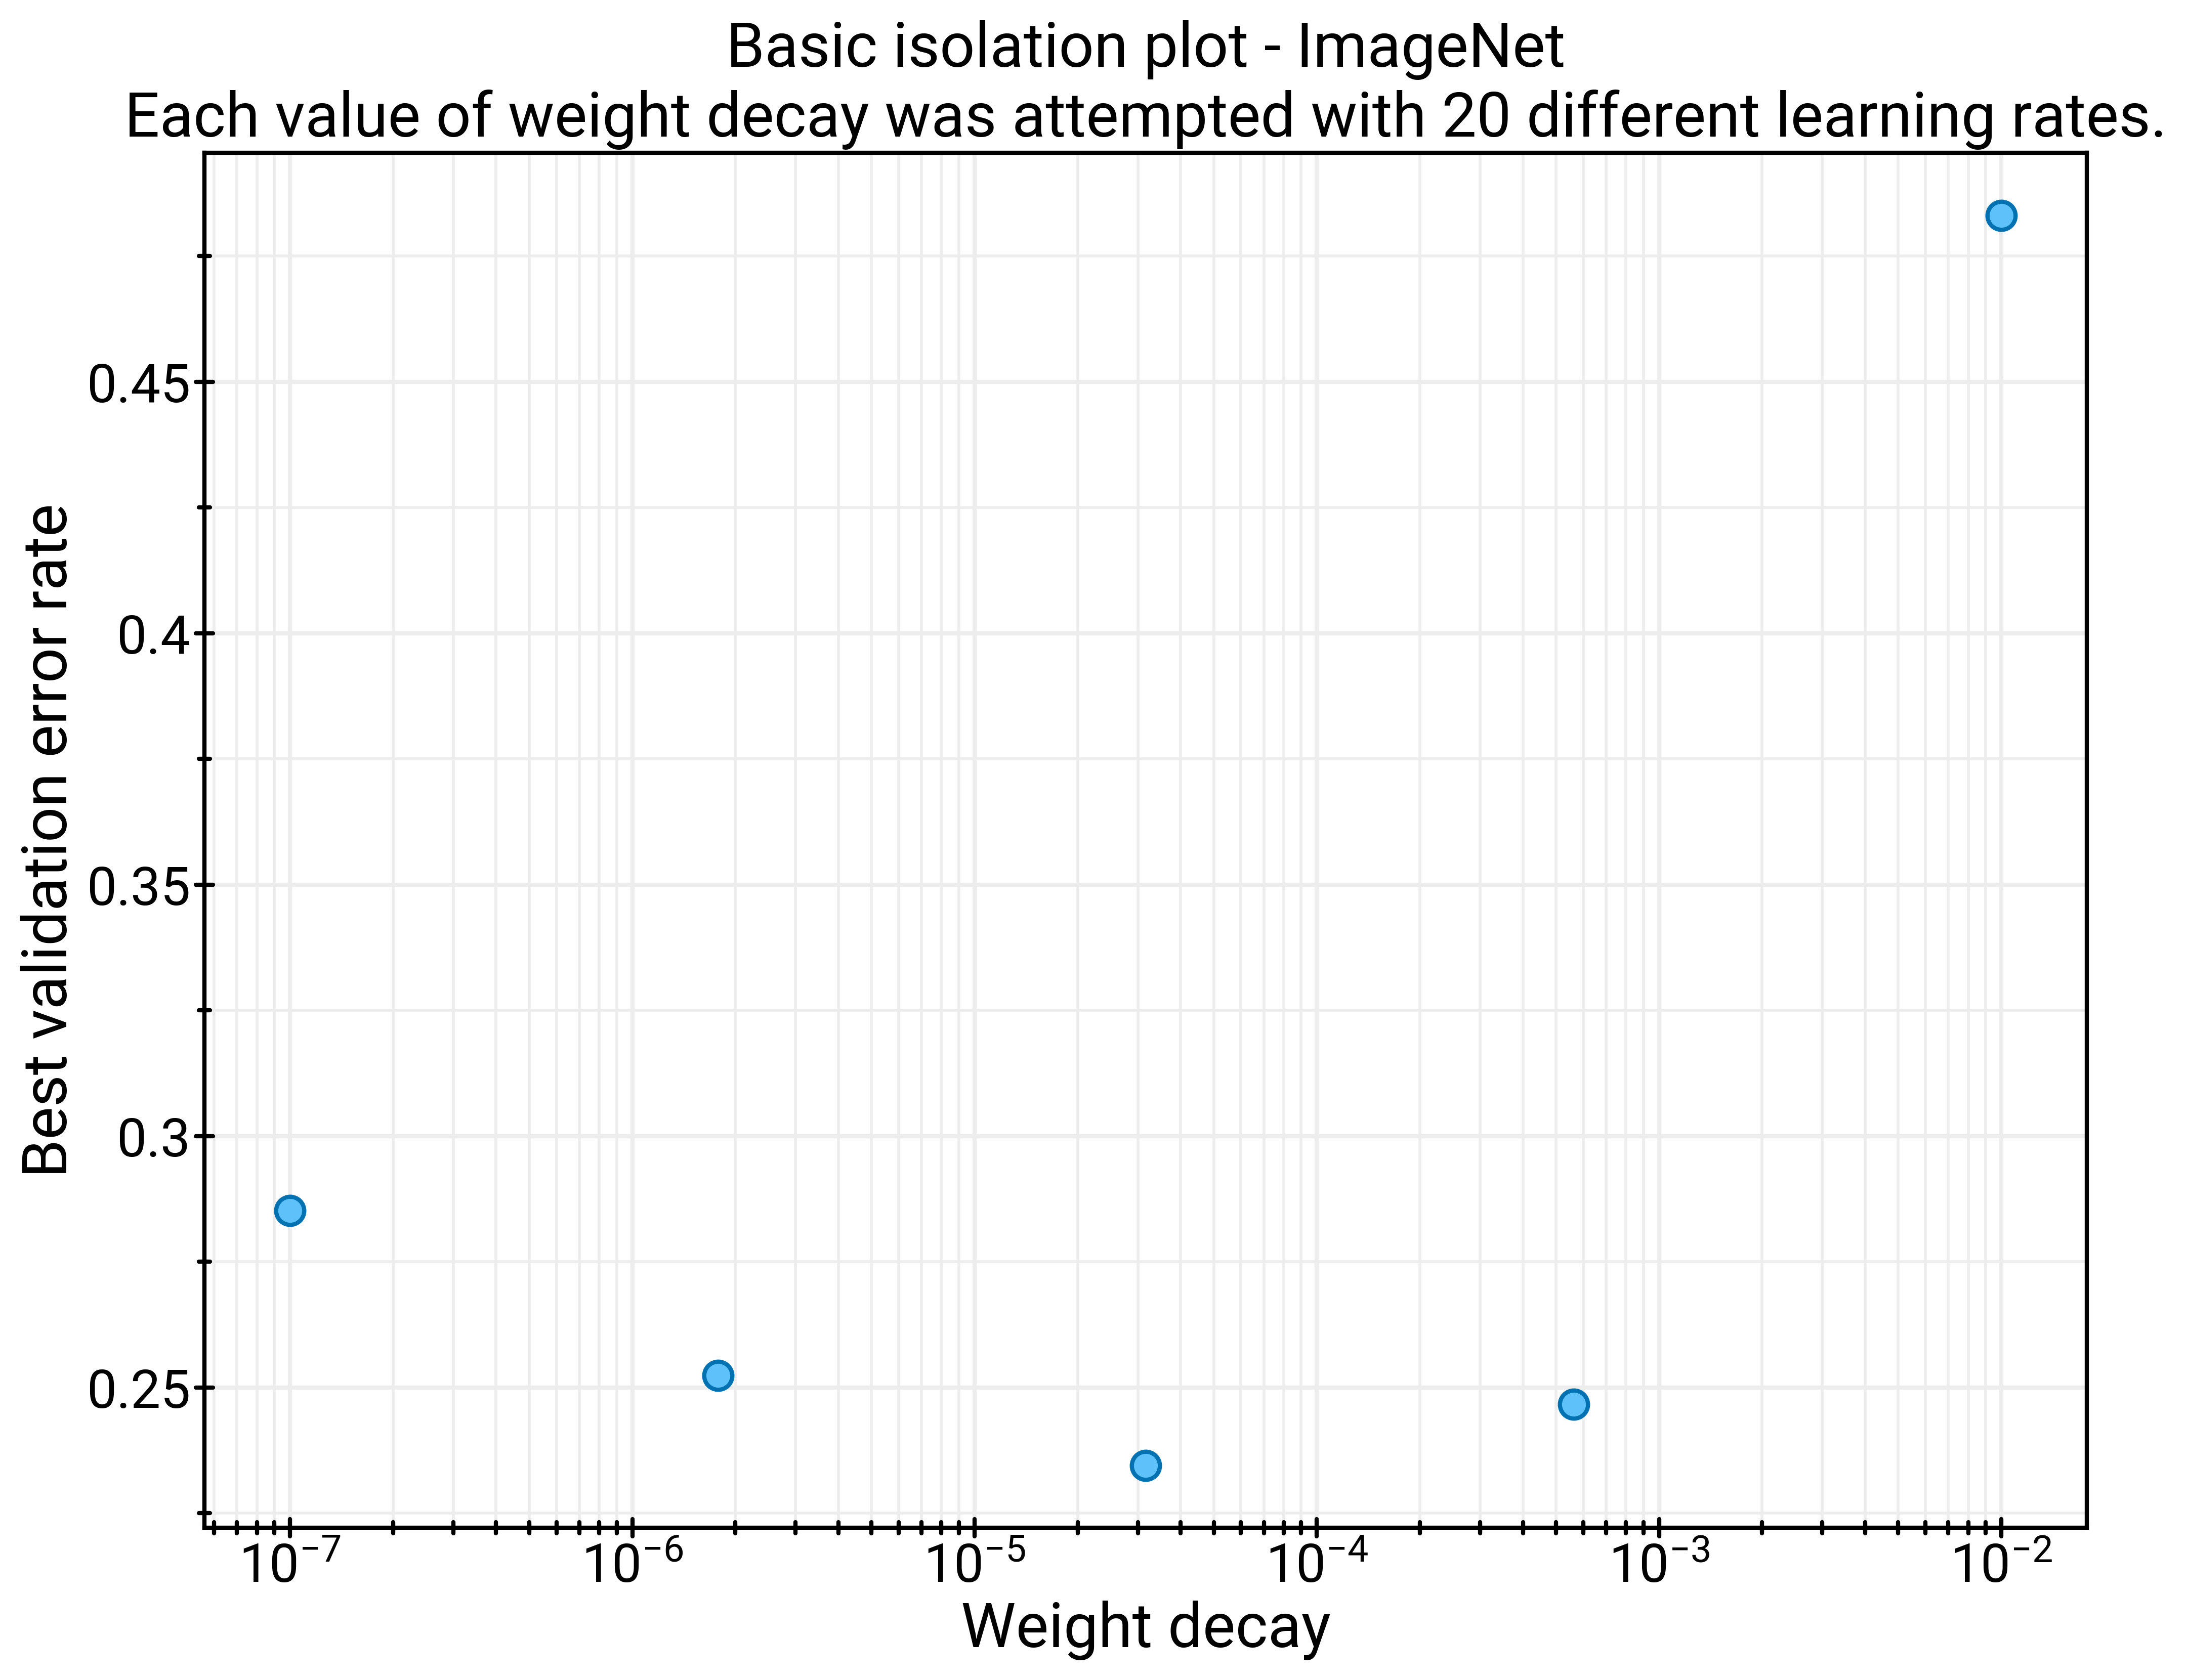 Isolation plot that investigates the best value of weight decay for ResNet-50
trained on ImageNet.